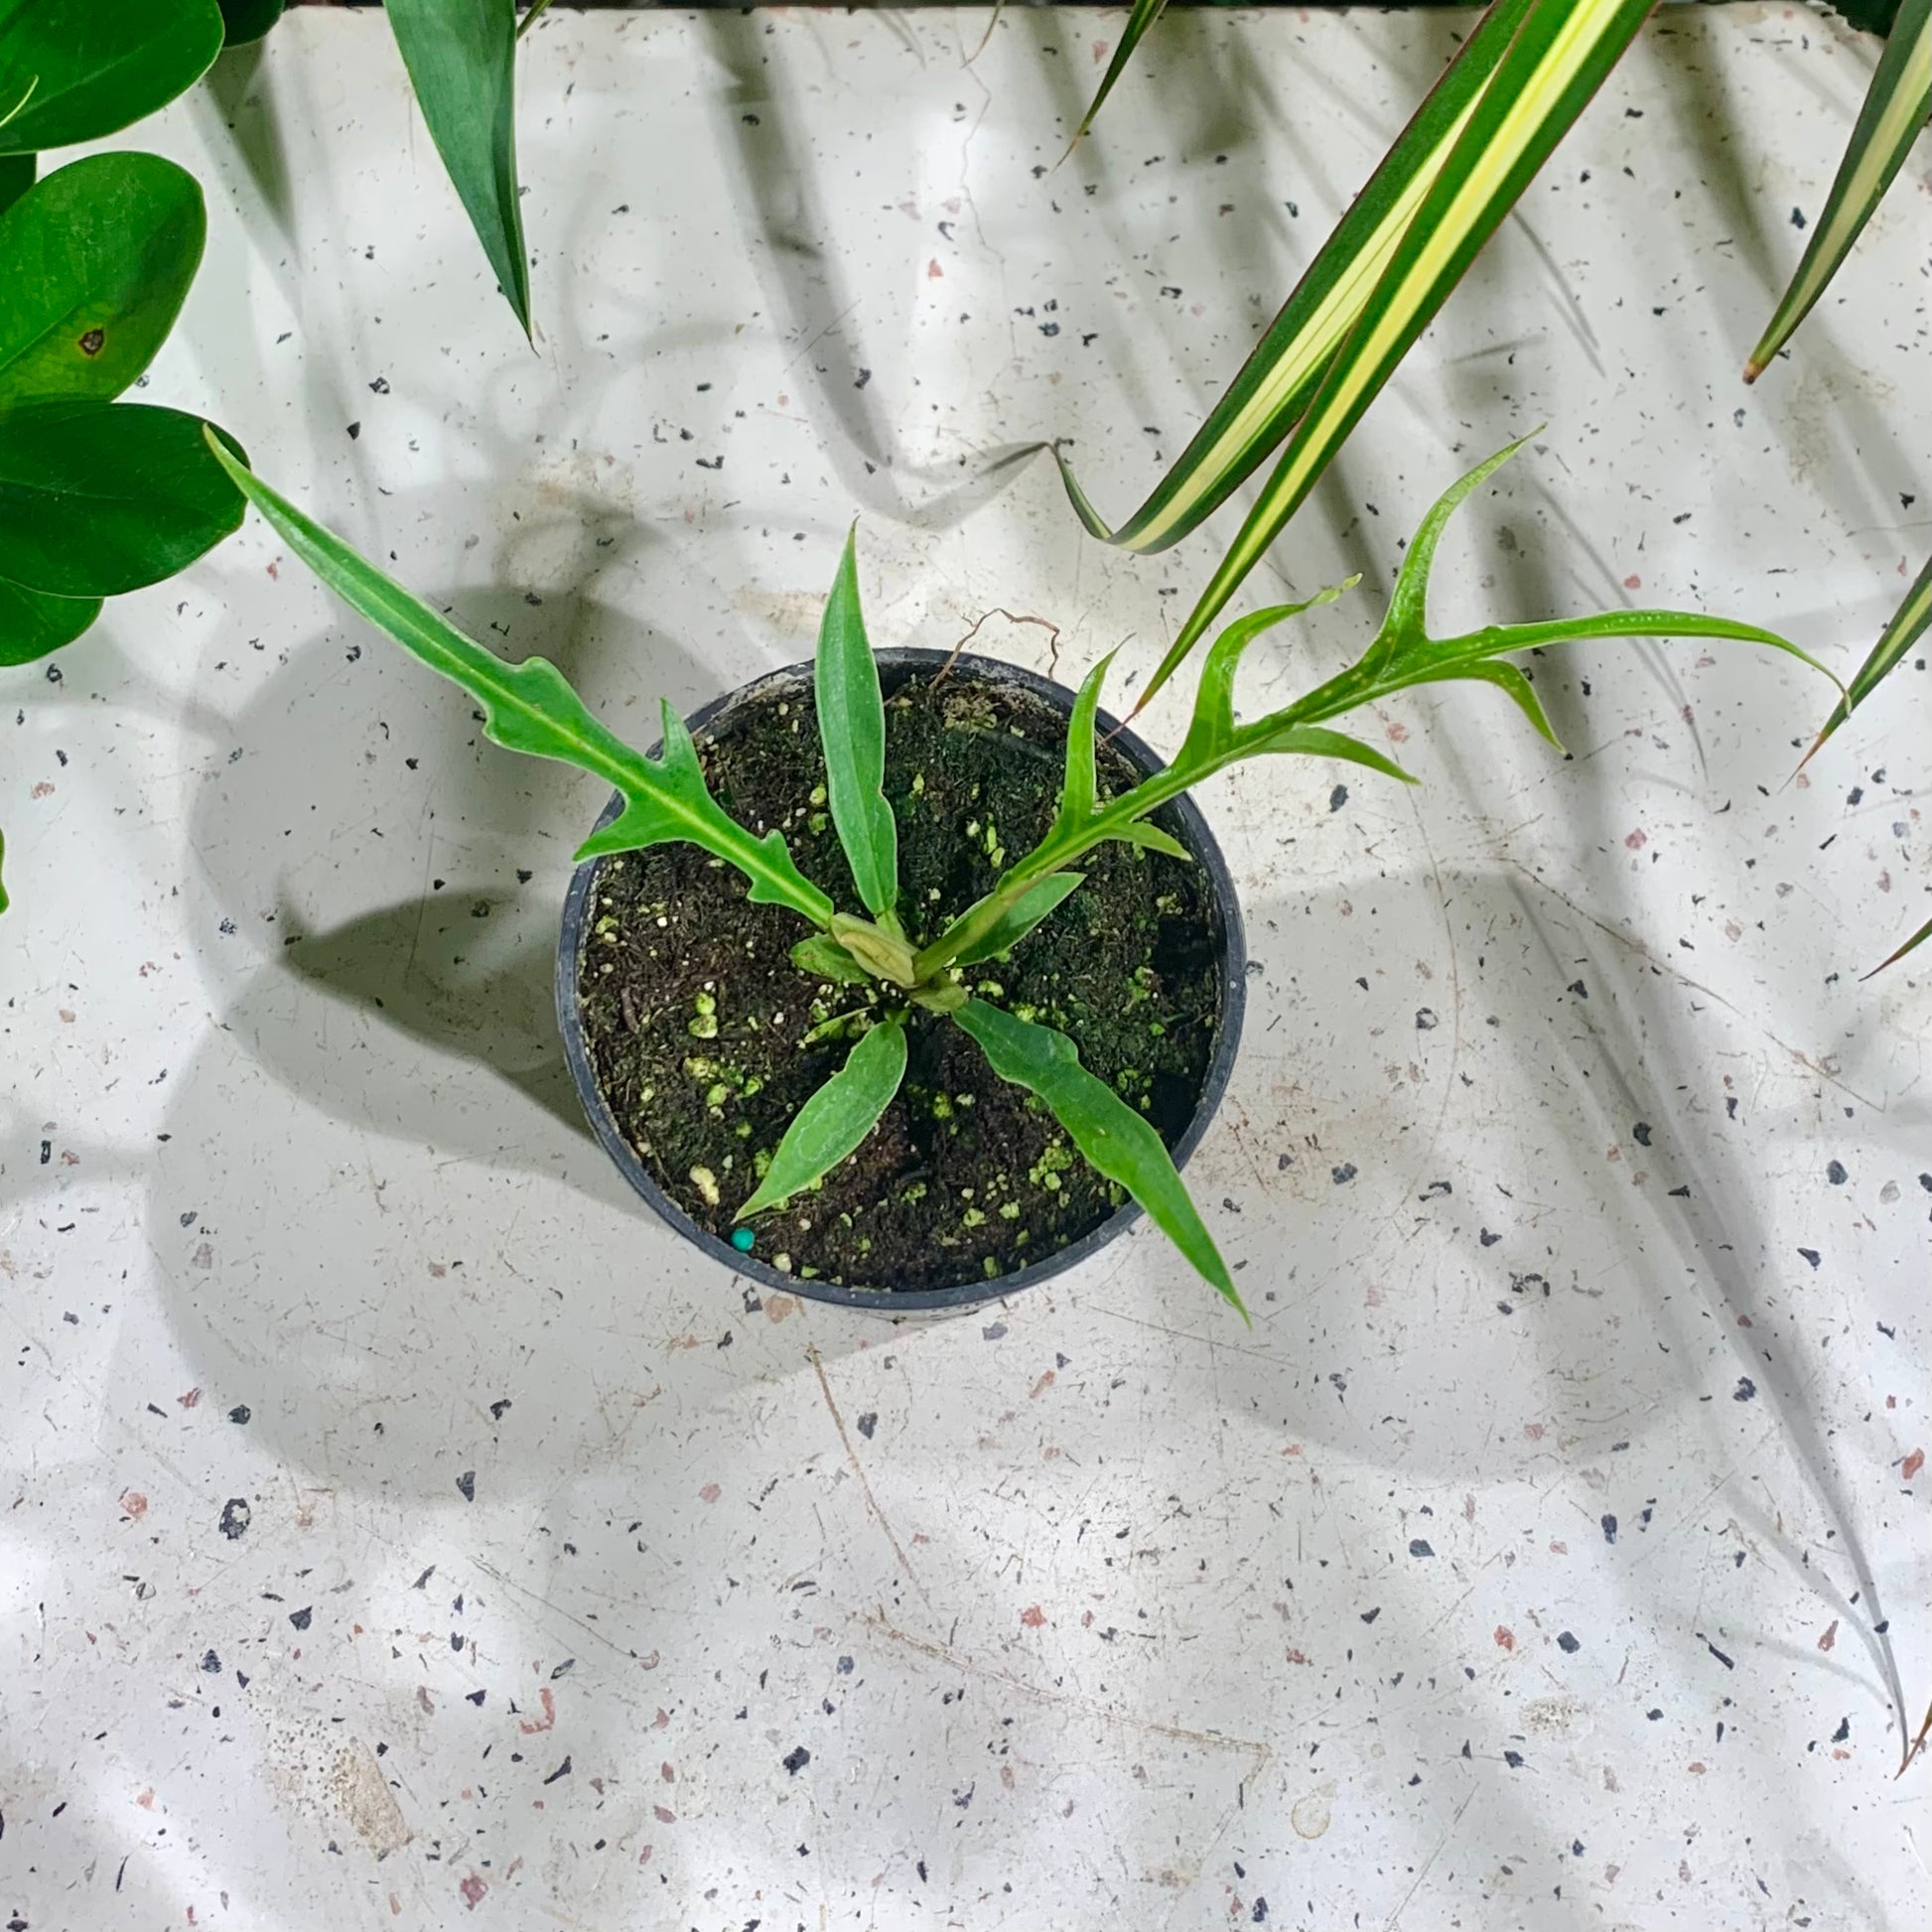 Philo Tortum (Philodendron bipinattifidum 'Tortum') in a 4 inch pot. Indoor plant for sale by Promise Supply for delivery and pickup in Toronto